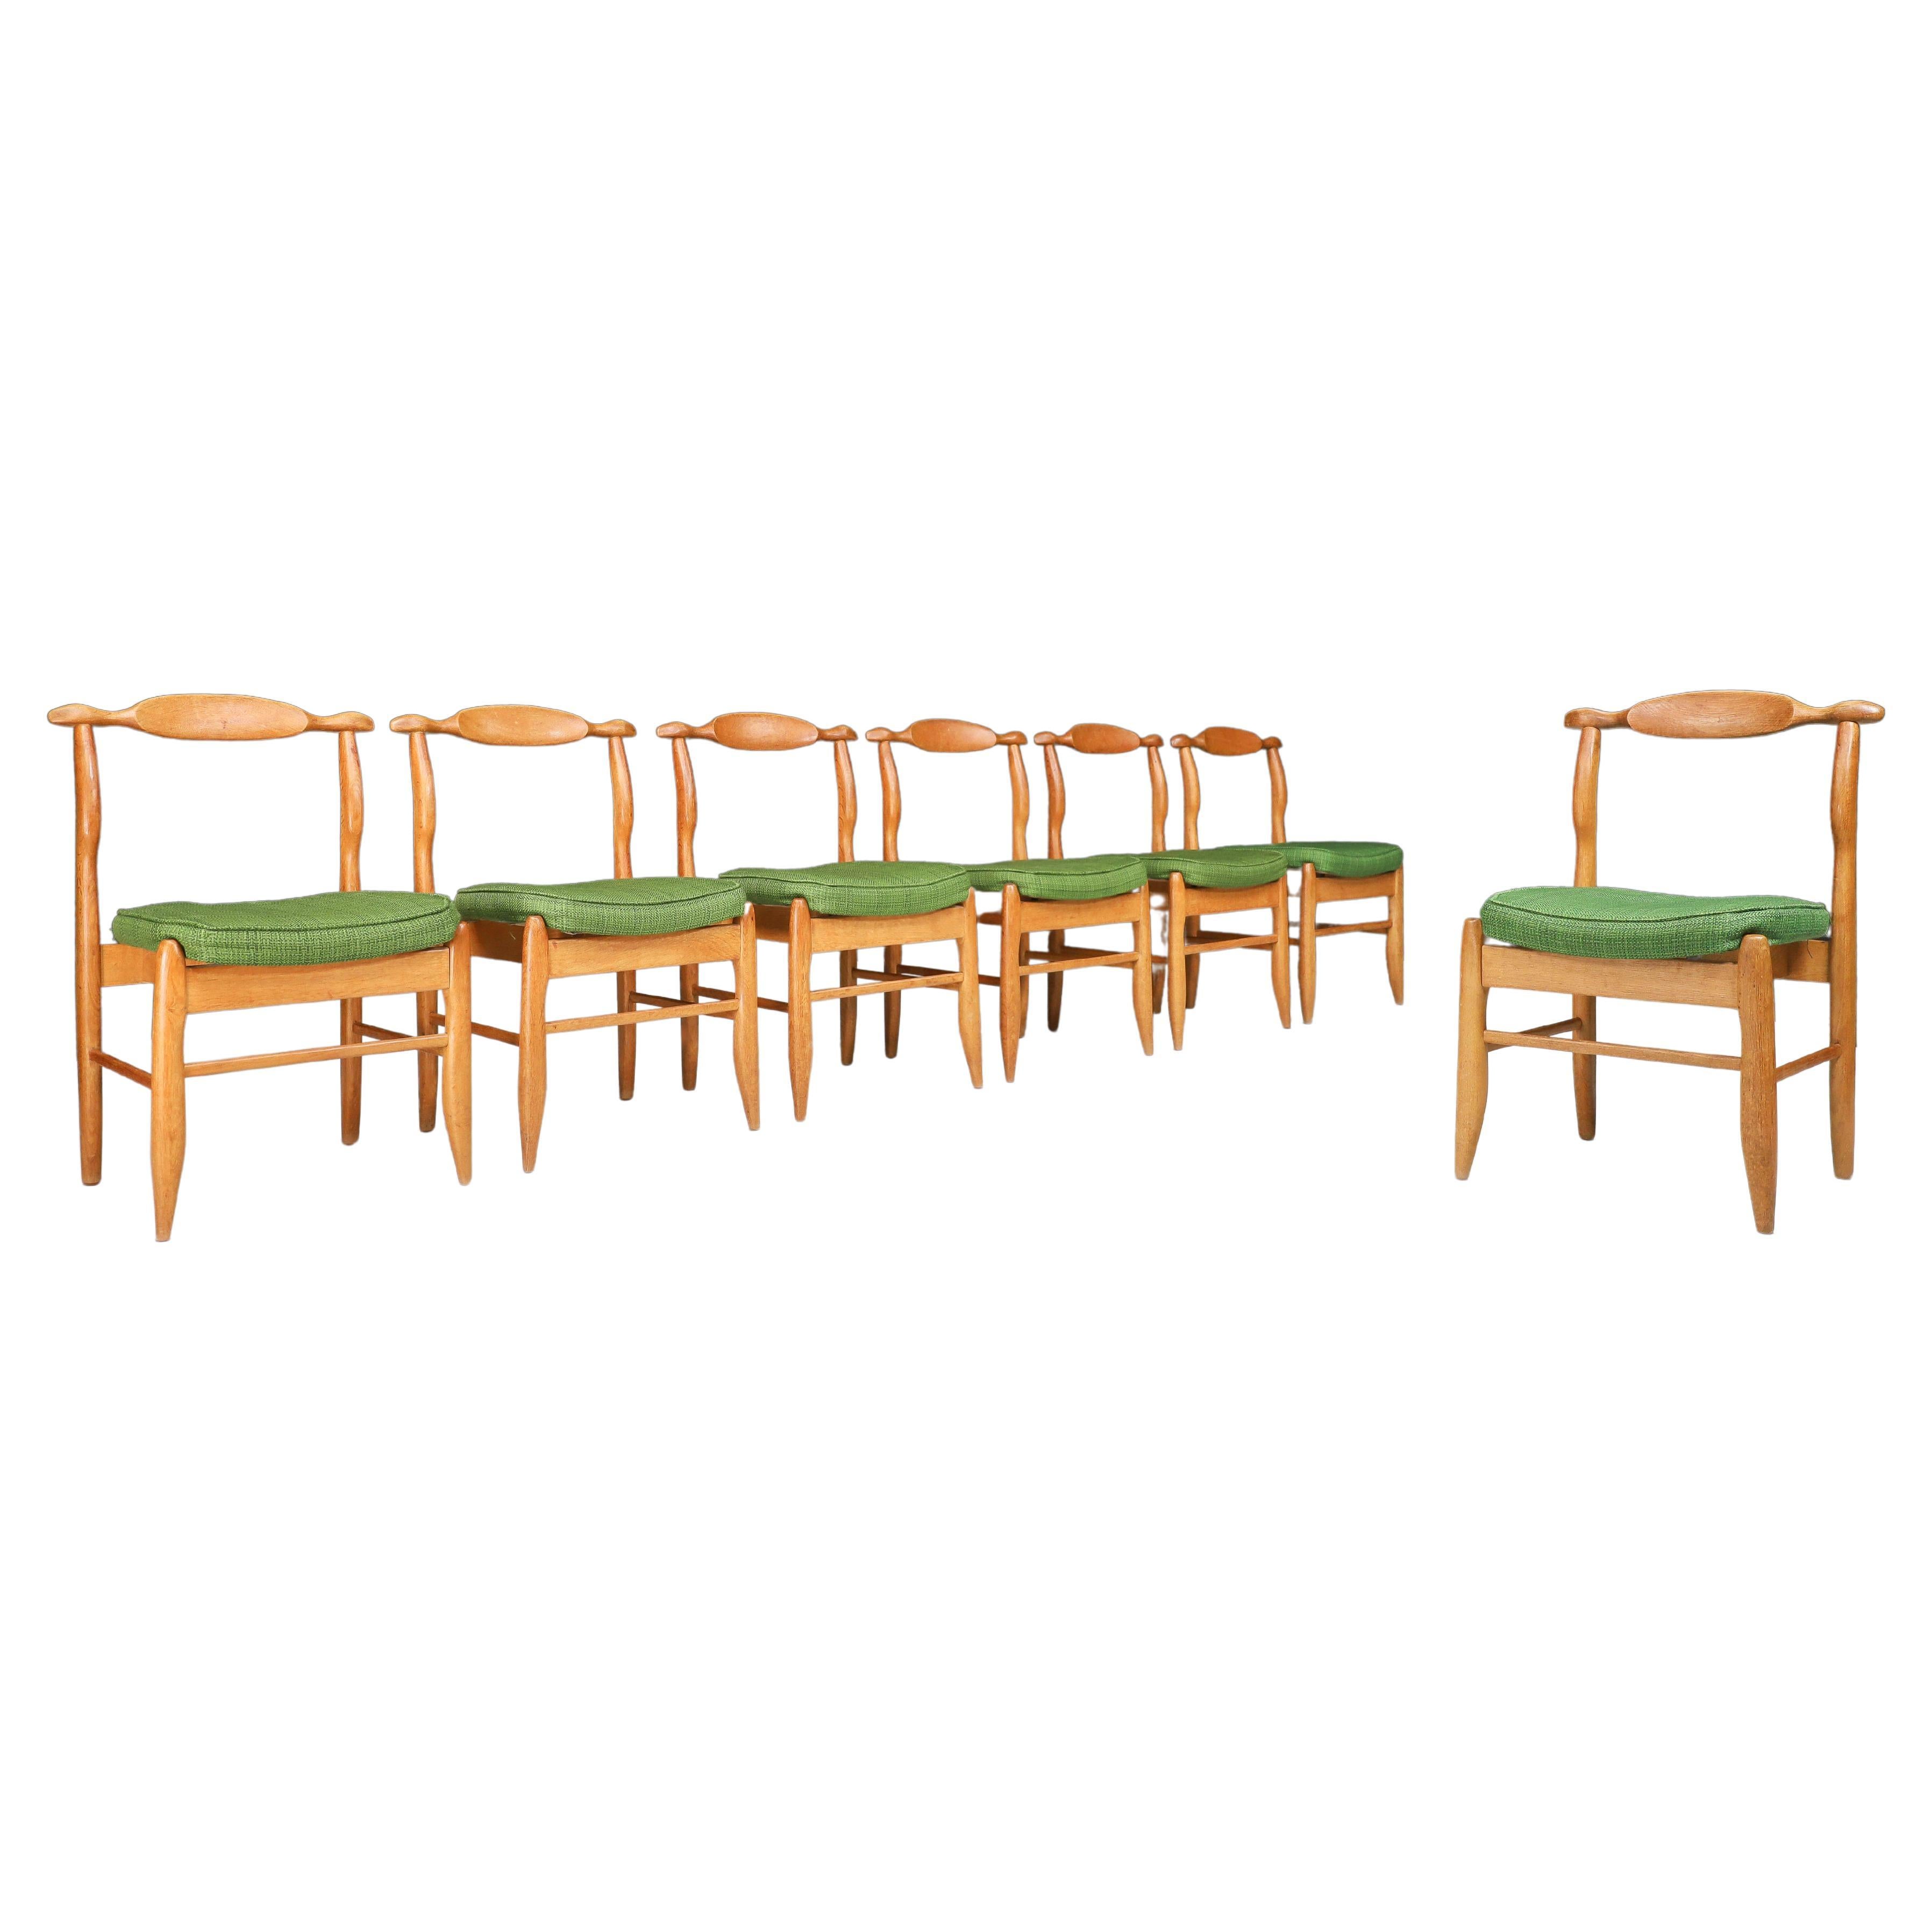 Guillerme & Chambron Set of Eight Dining Chairs in Oak and Forrest Green Fabric